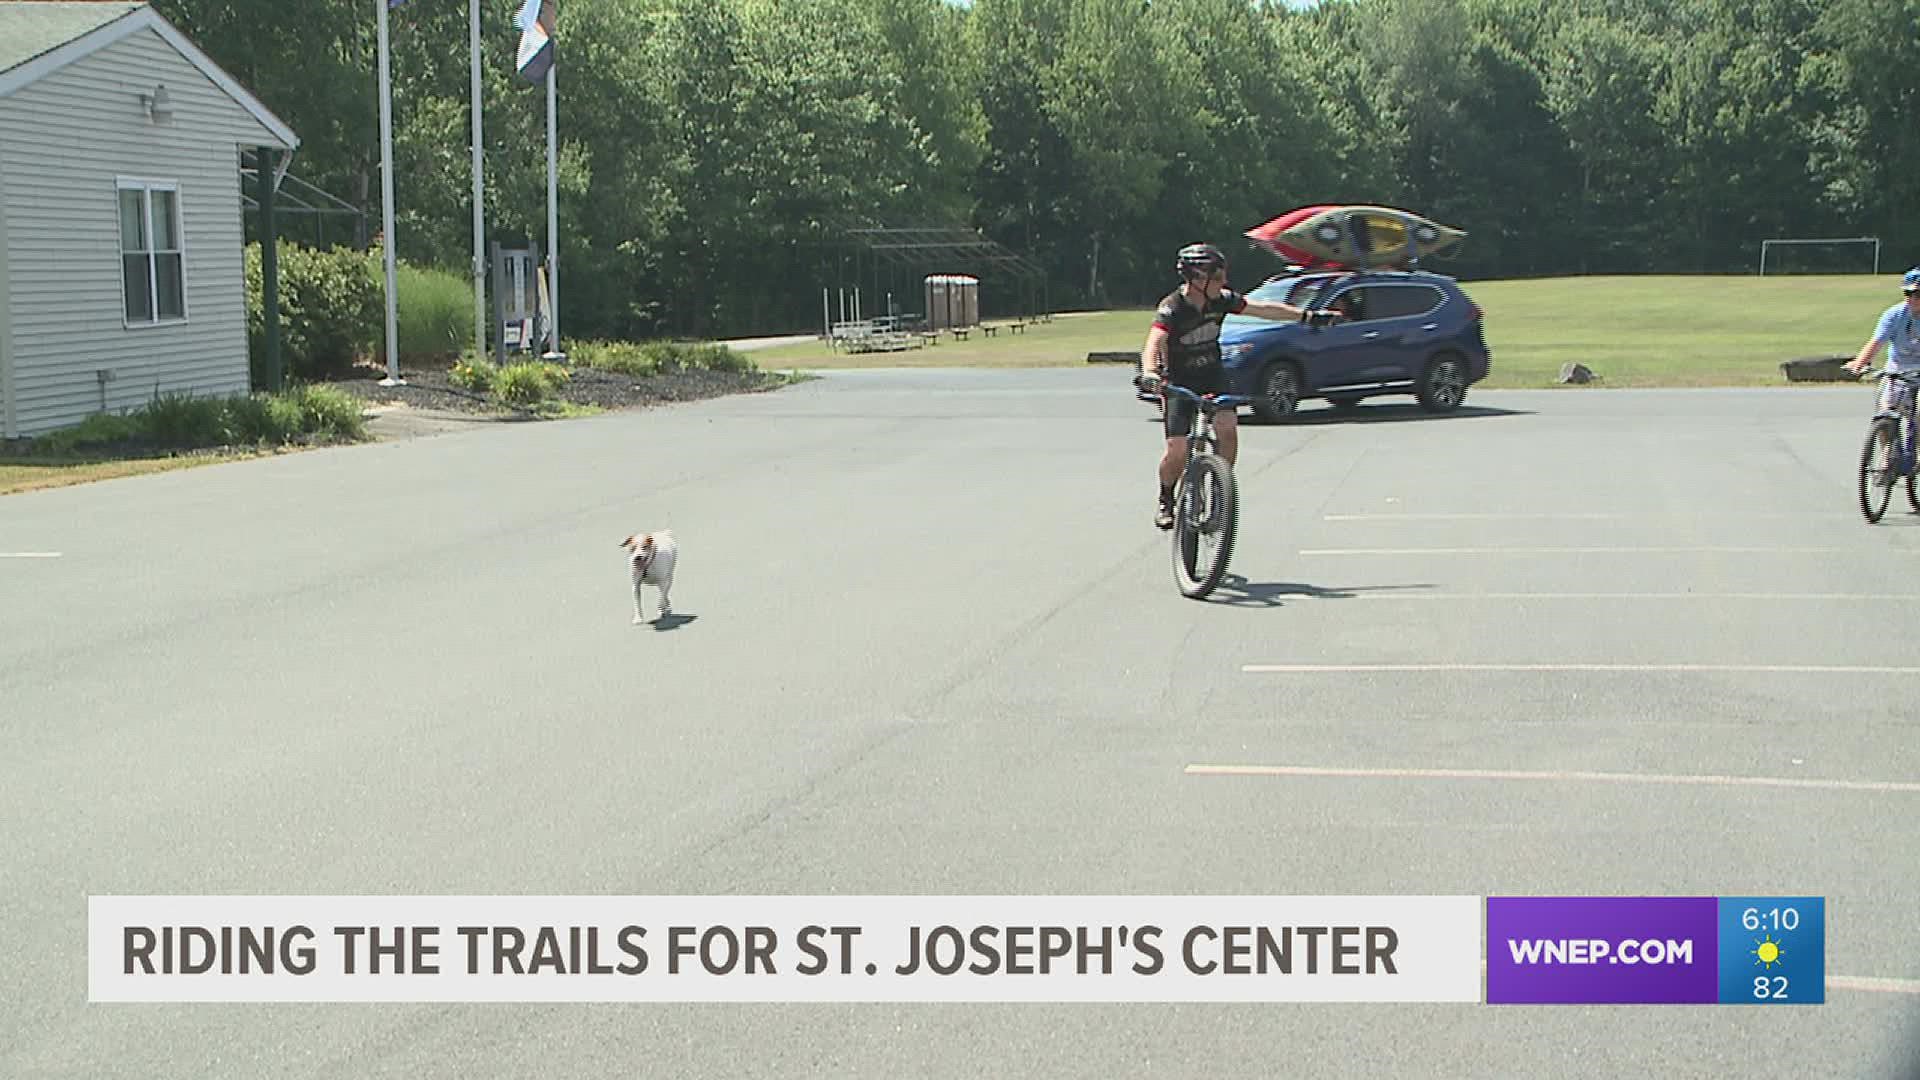 Mountain bike riders including our own Joe Snedeker with his dog Jett hit the trails.